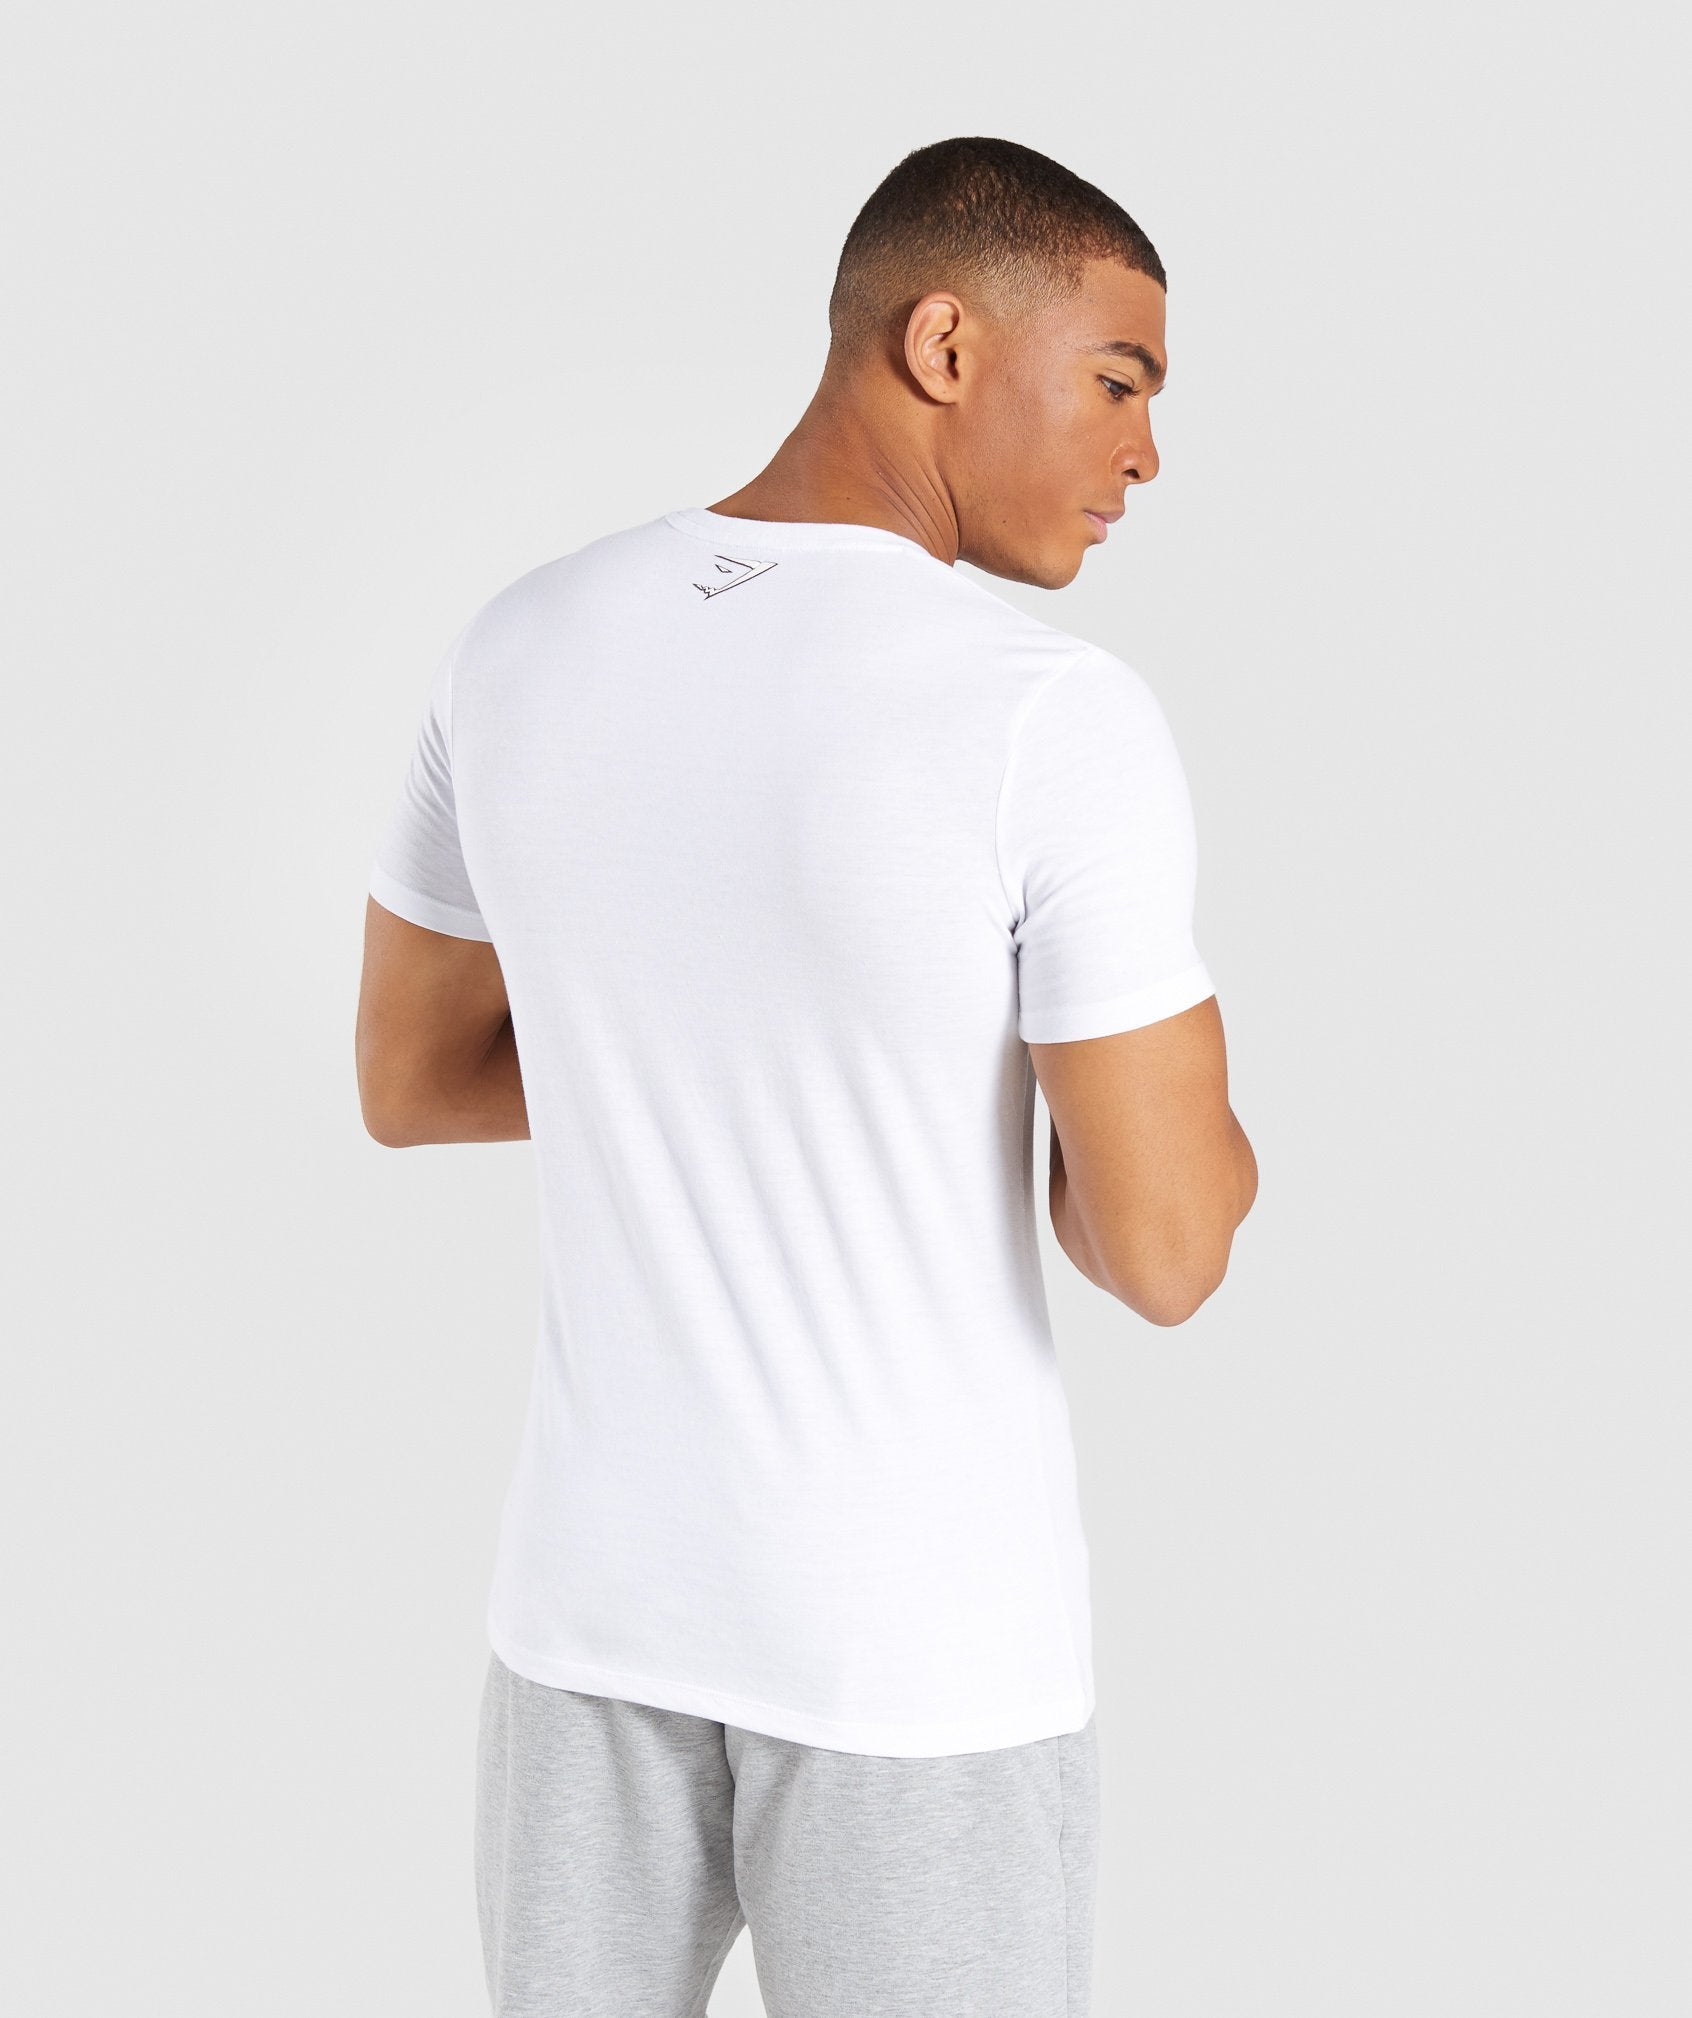 Profile T-Shirt in White - view 2